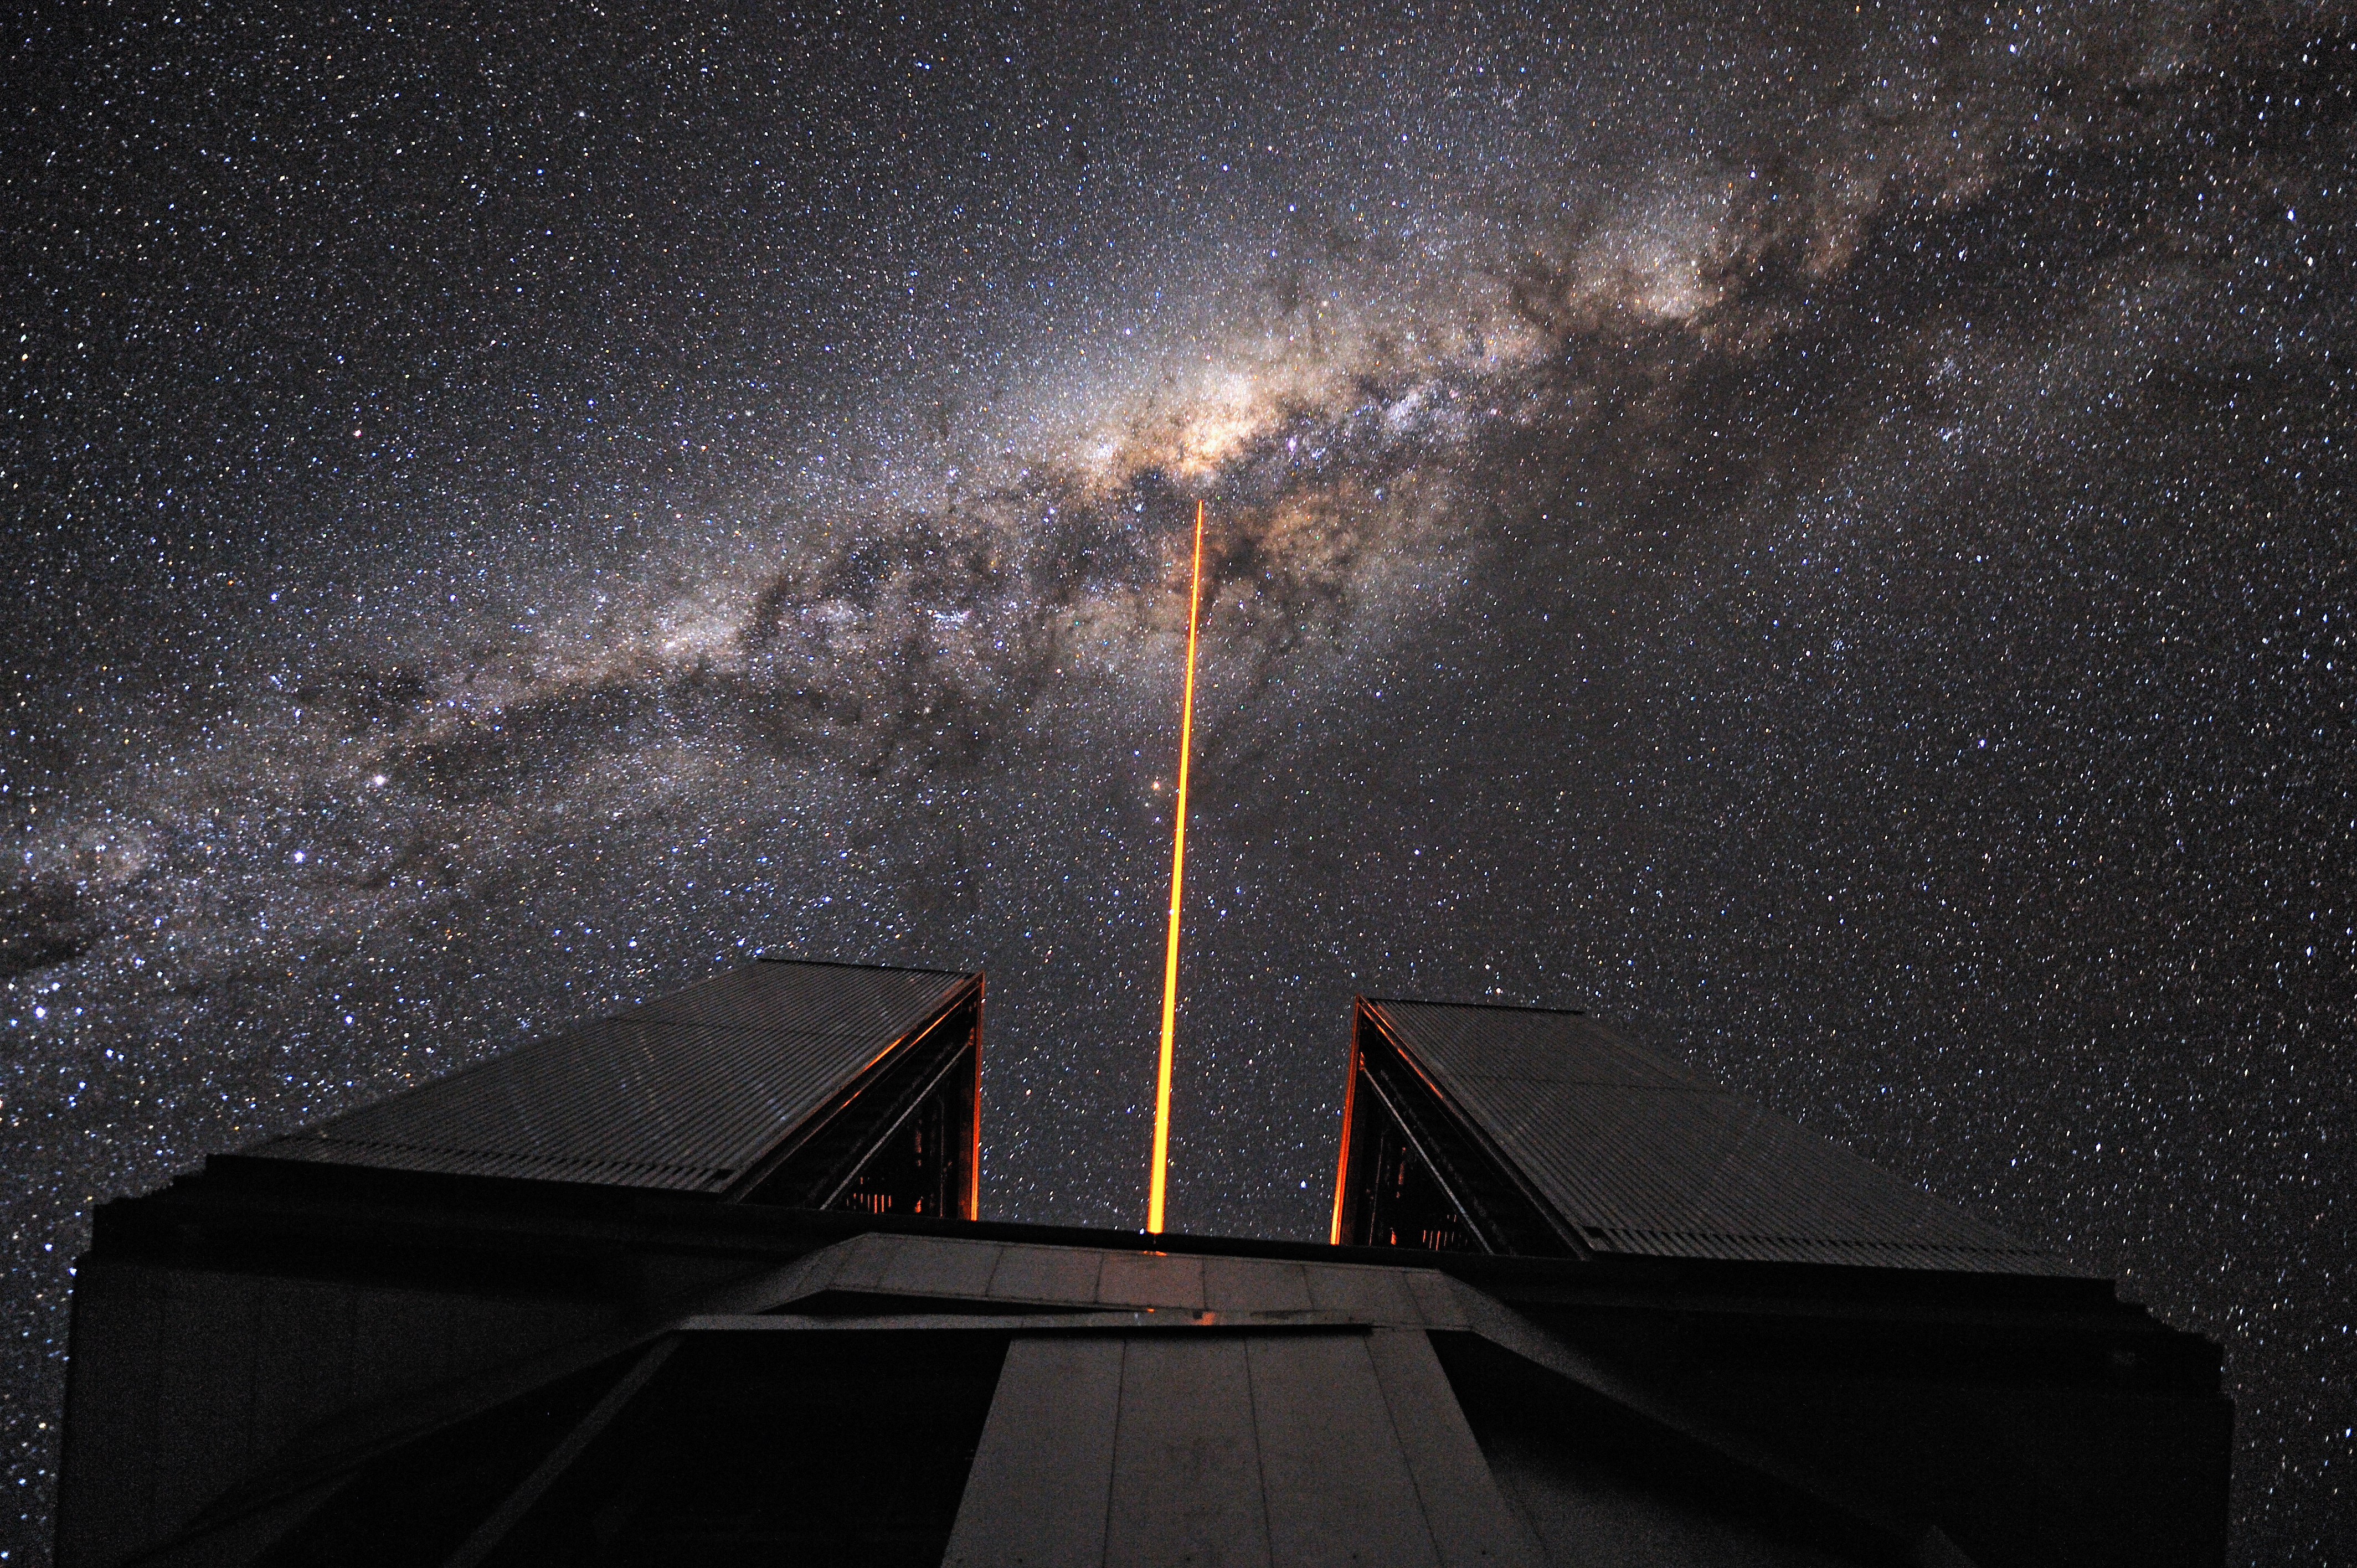 Part of the European Southern Observatory's Very Large Telescope, this laser guide star helps astronomers correct blurry images caused by atmospheric turbulence. Photo credit: G. Hüdepohl/ESO